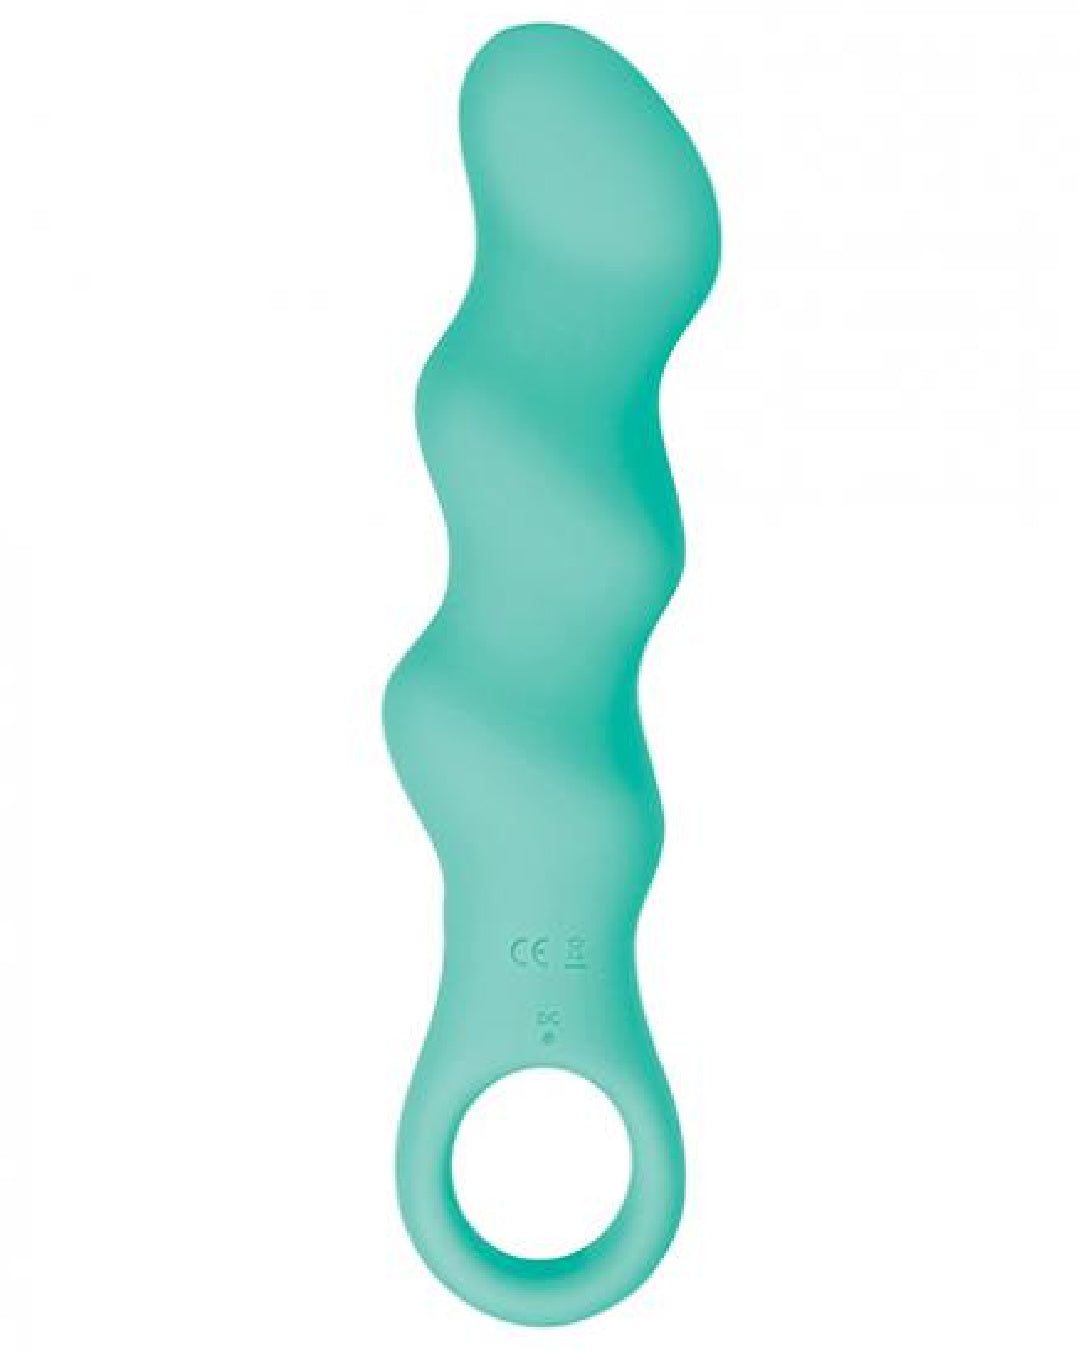 Triple Side view of mint green Teaser Powerful 3 Motor Silicone Vibrator